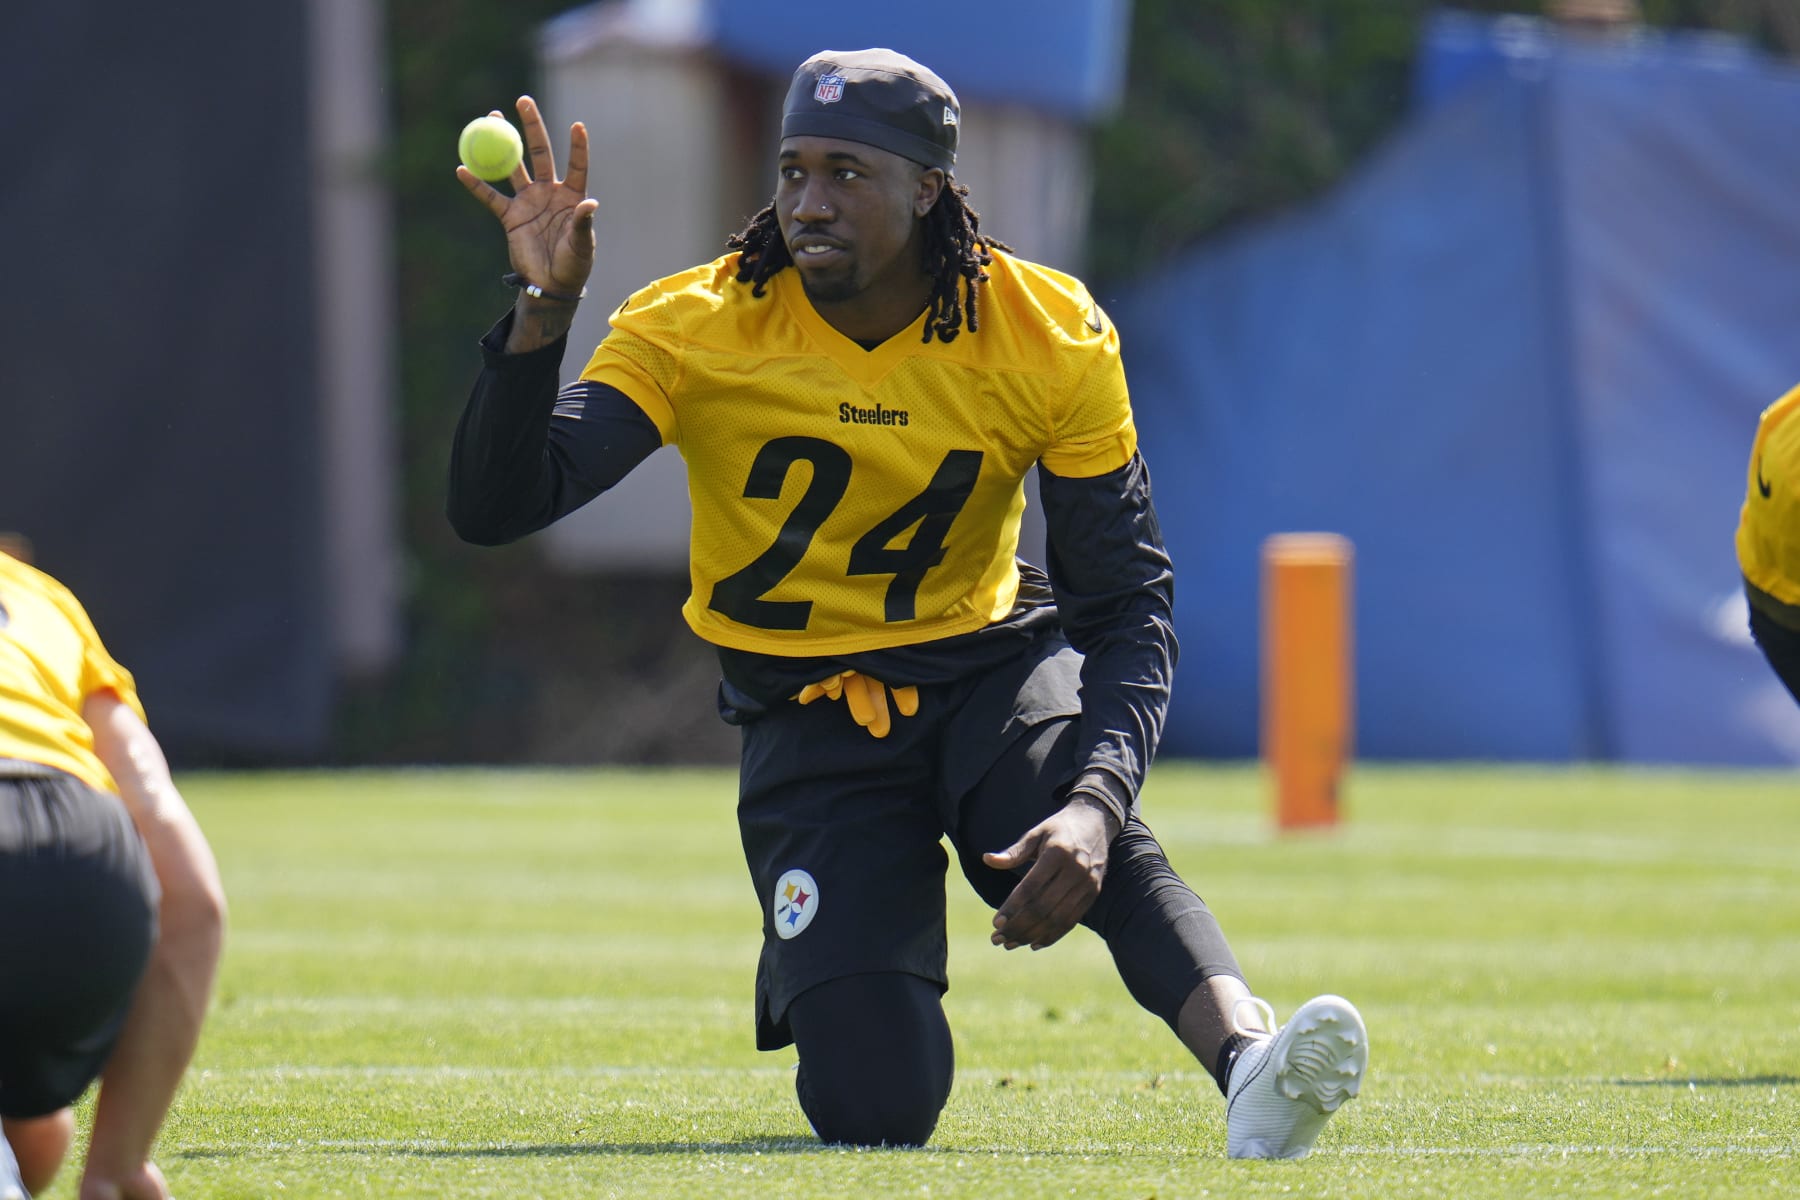 Steelers' Rising Stars Joey Porter Jr. and Cory Trice Jr.'s Promising Synergy on the Field